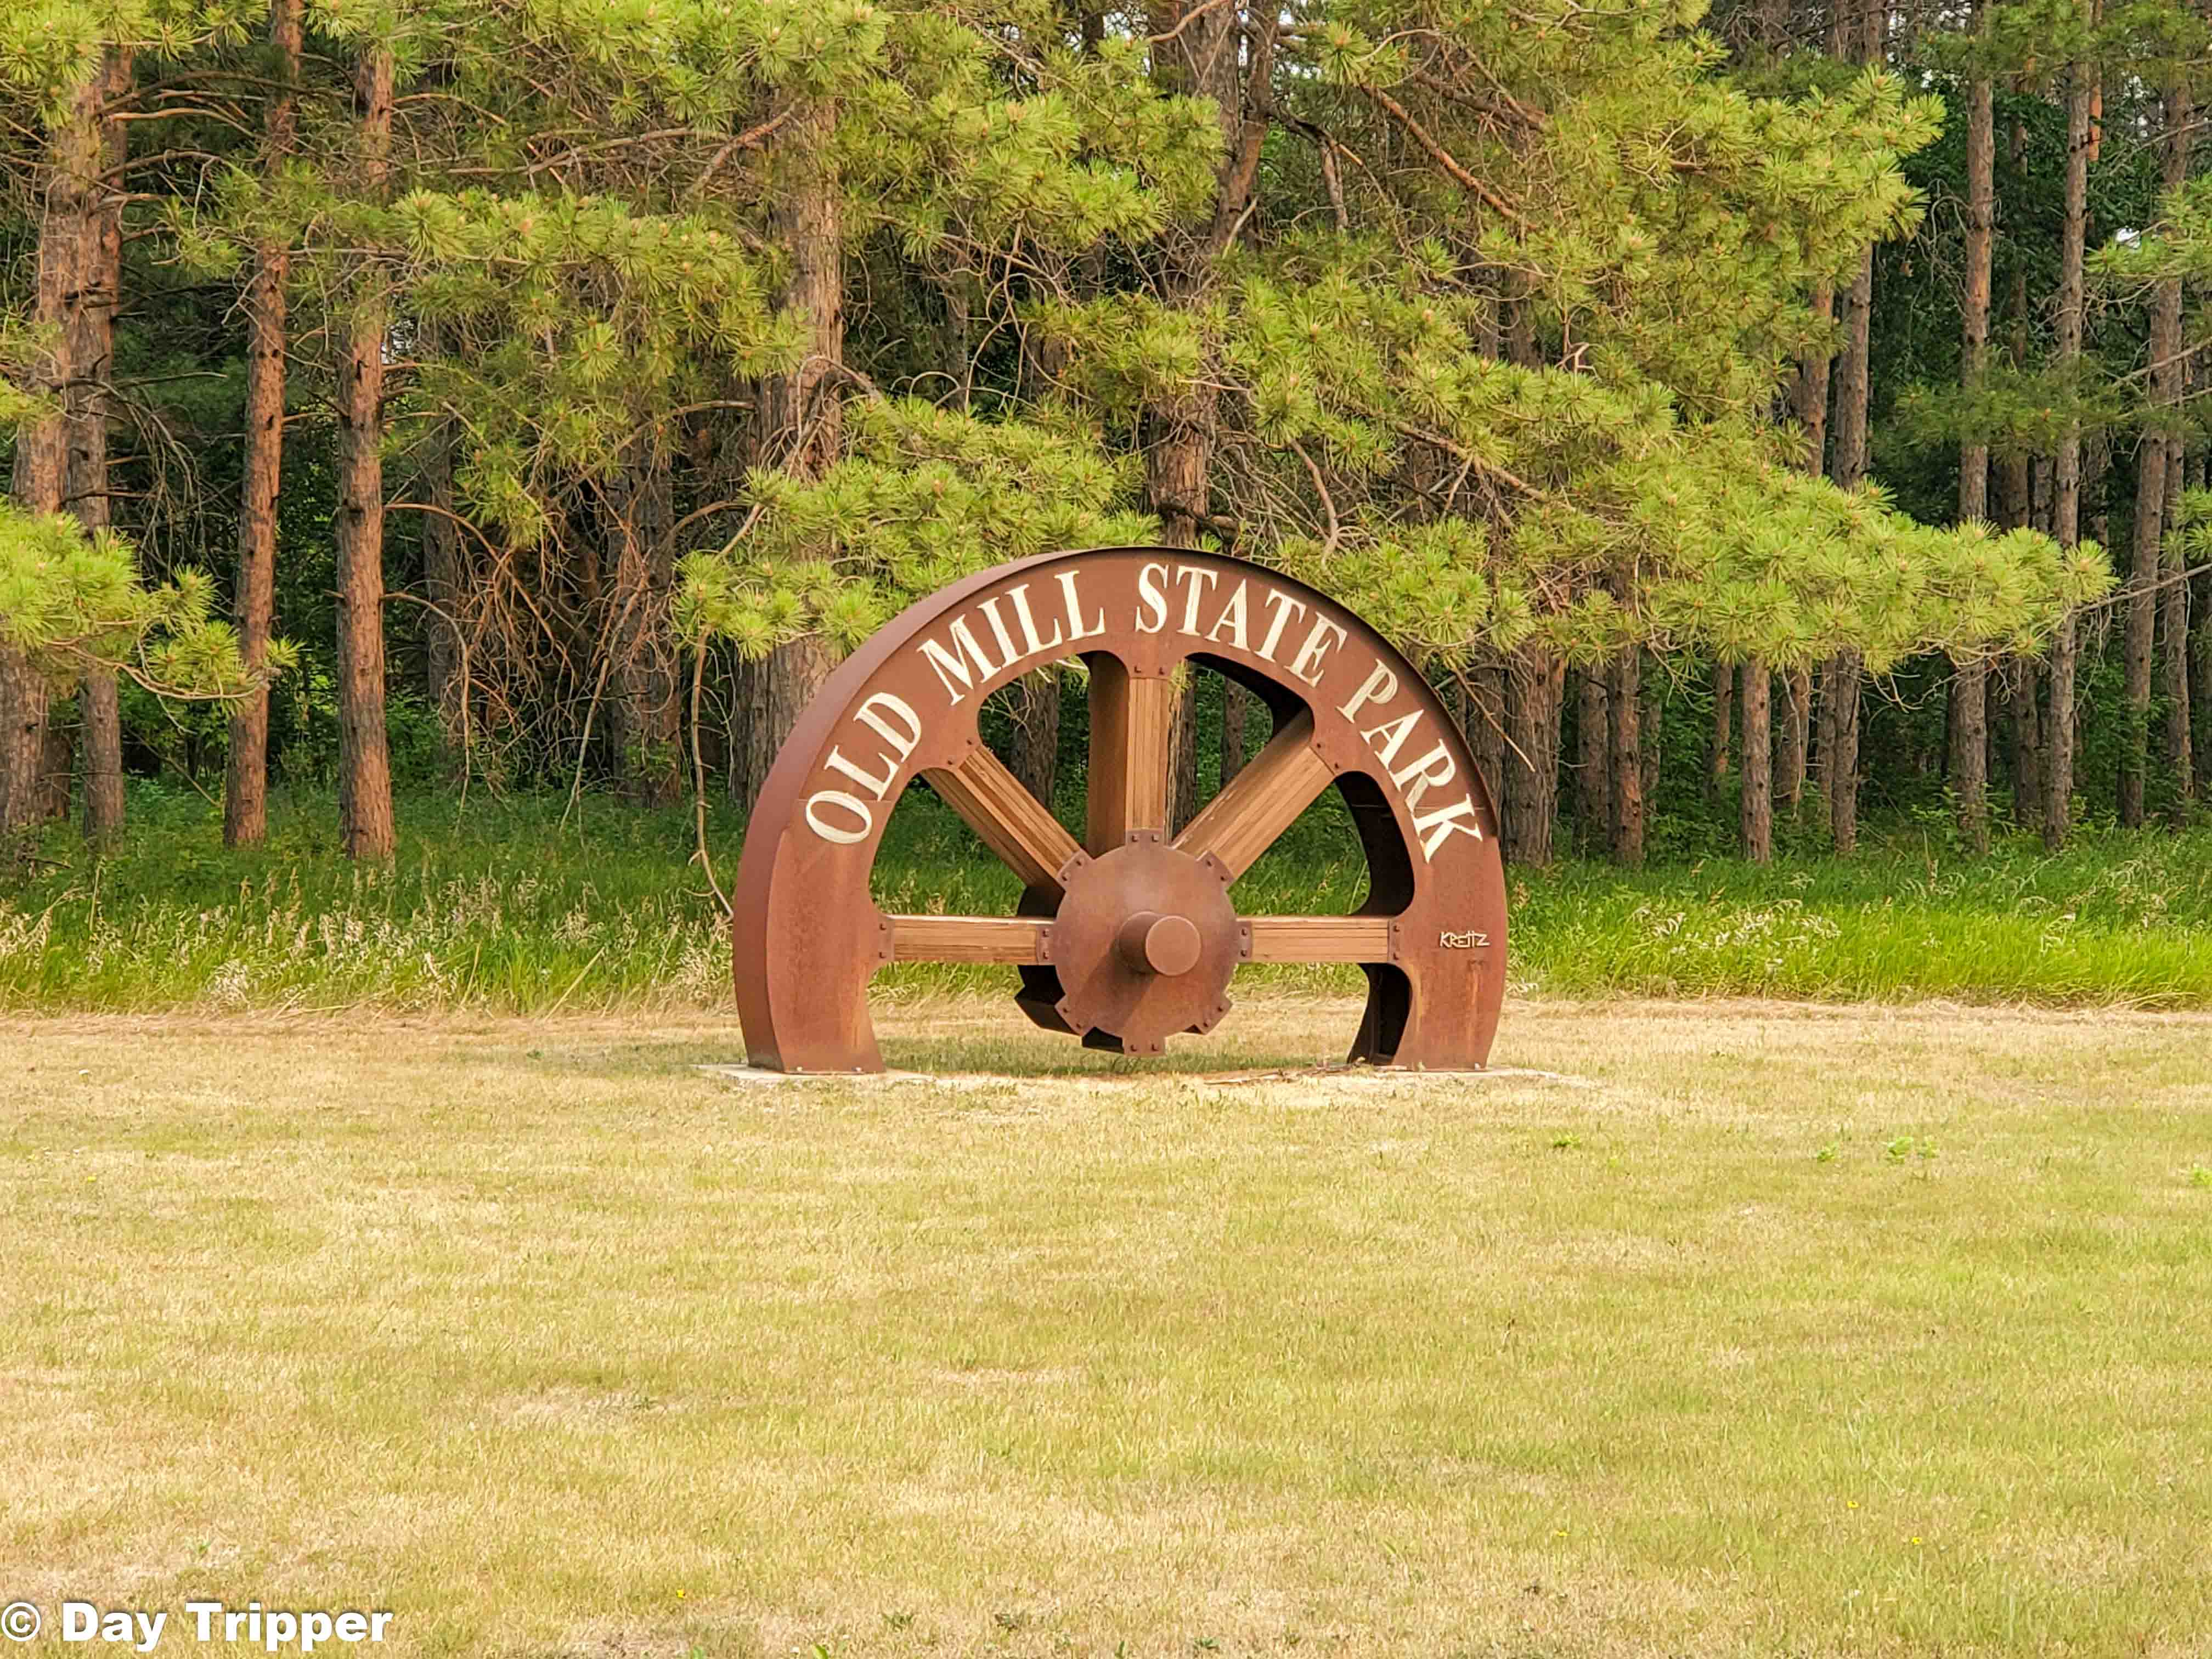 Things to do at Old Mill State Park